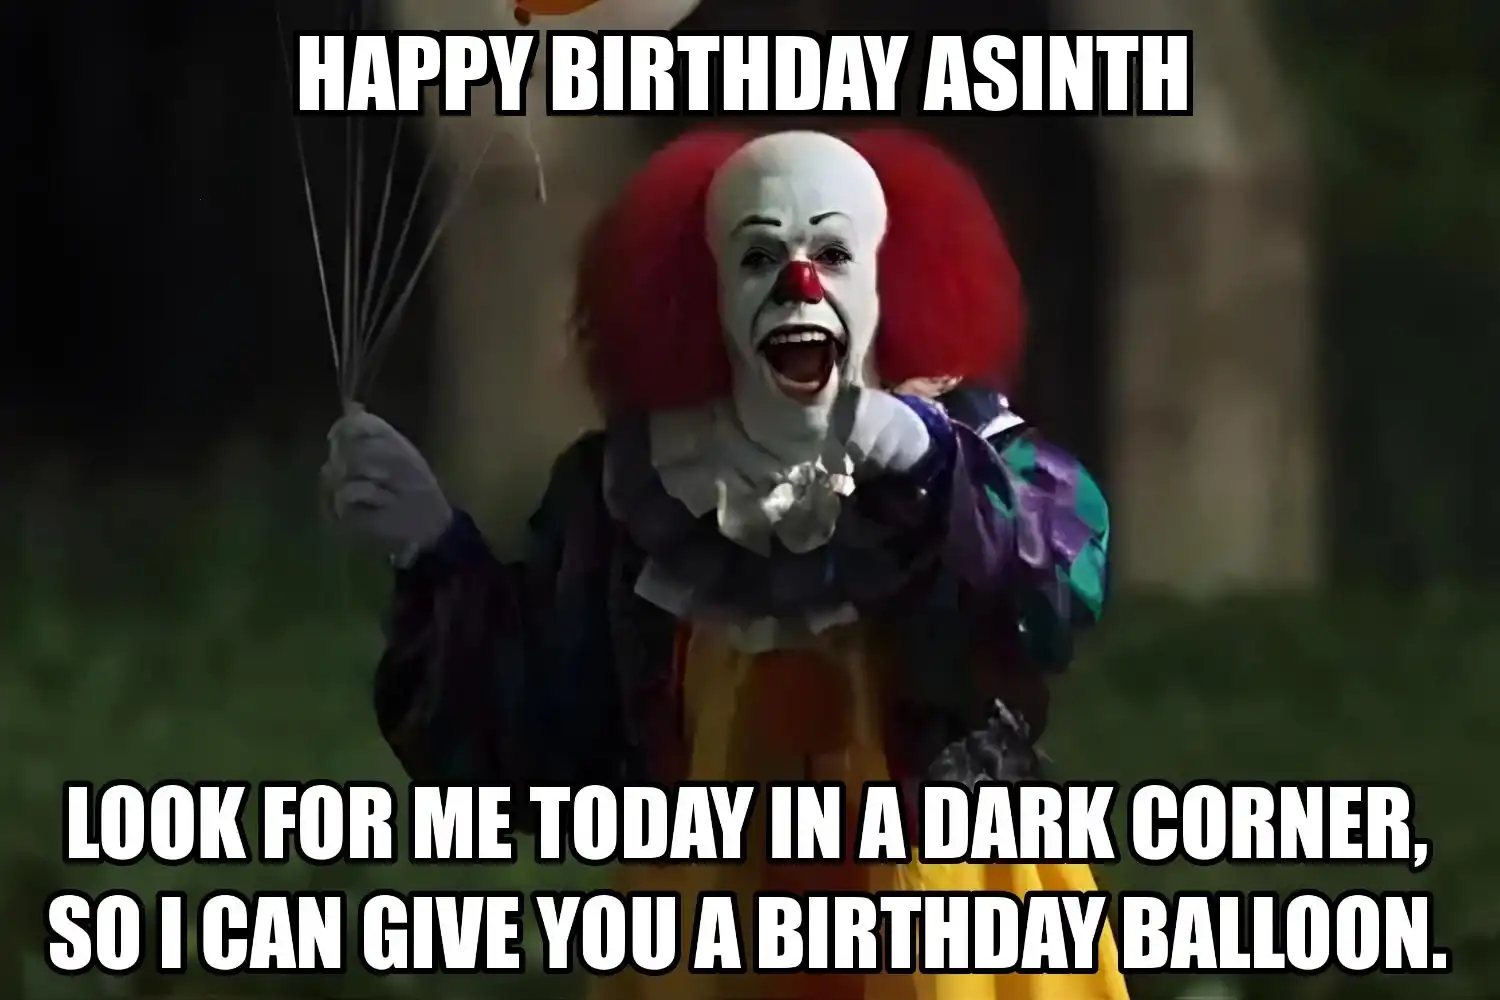 Happy Birthday Asinth I Can Give You A Balloon Meme